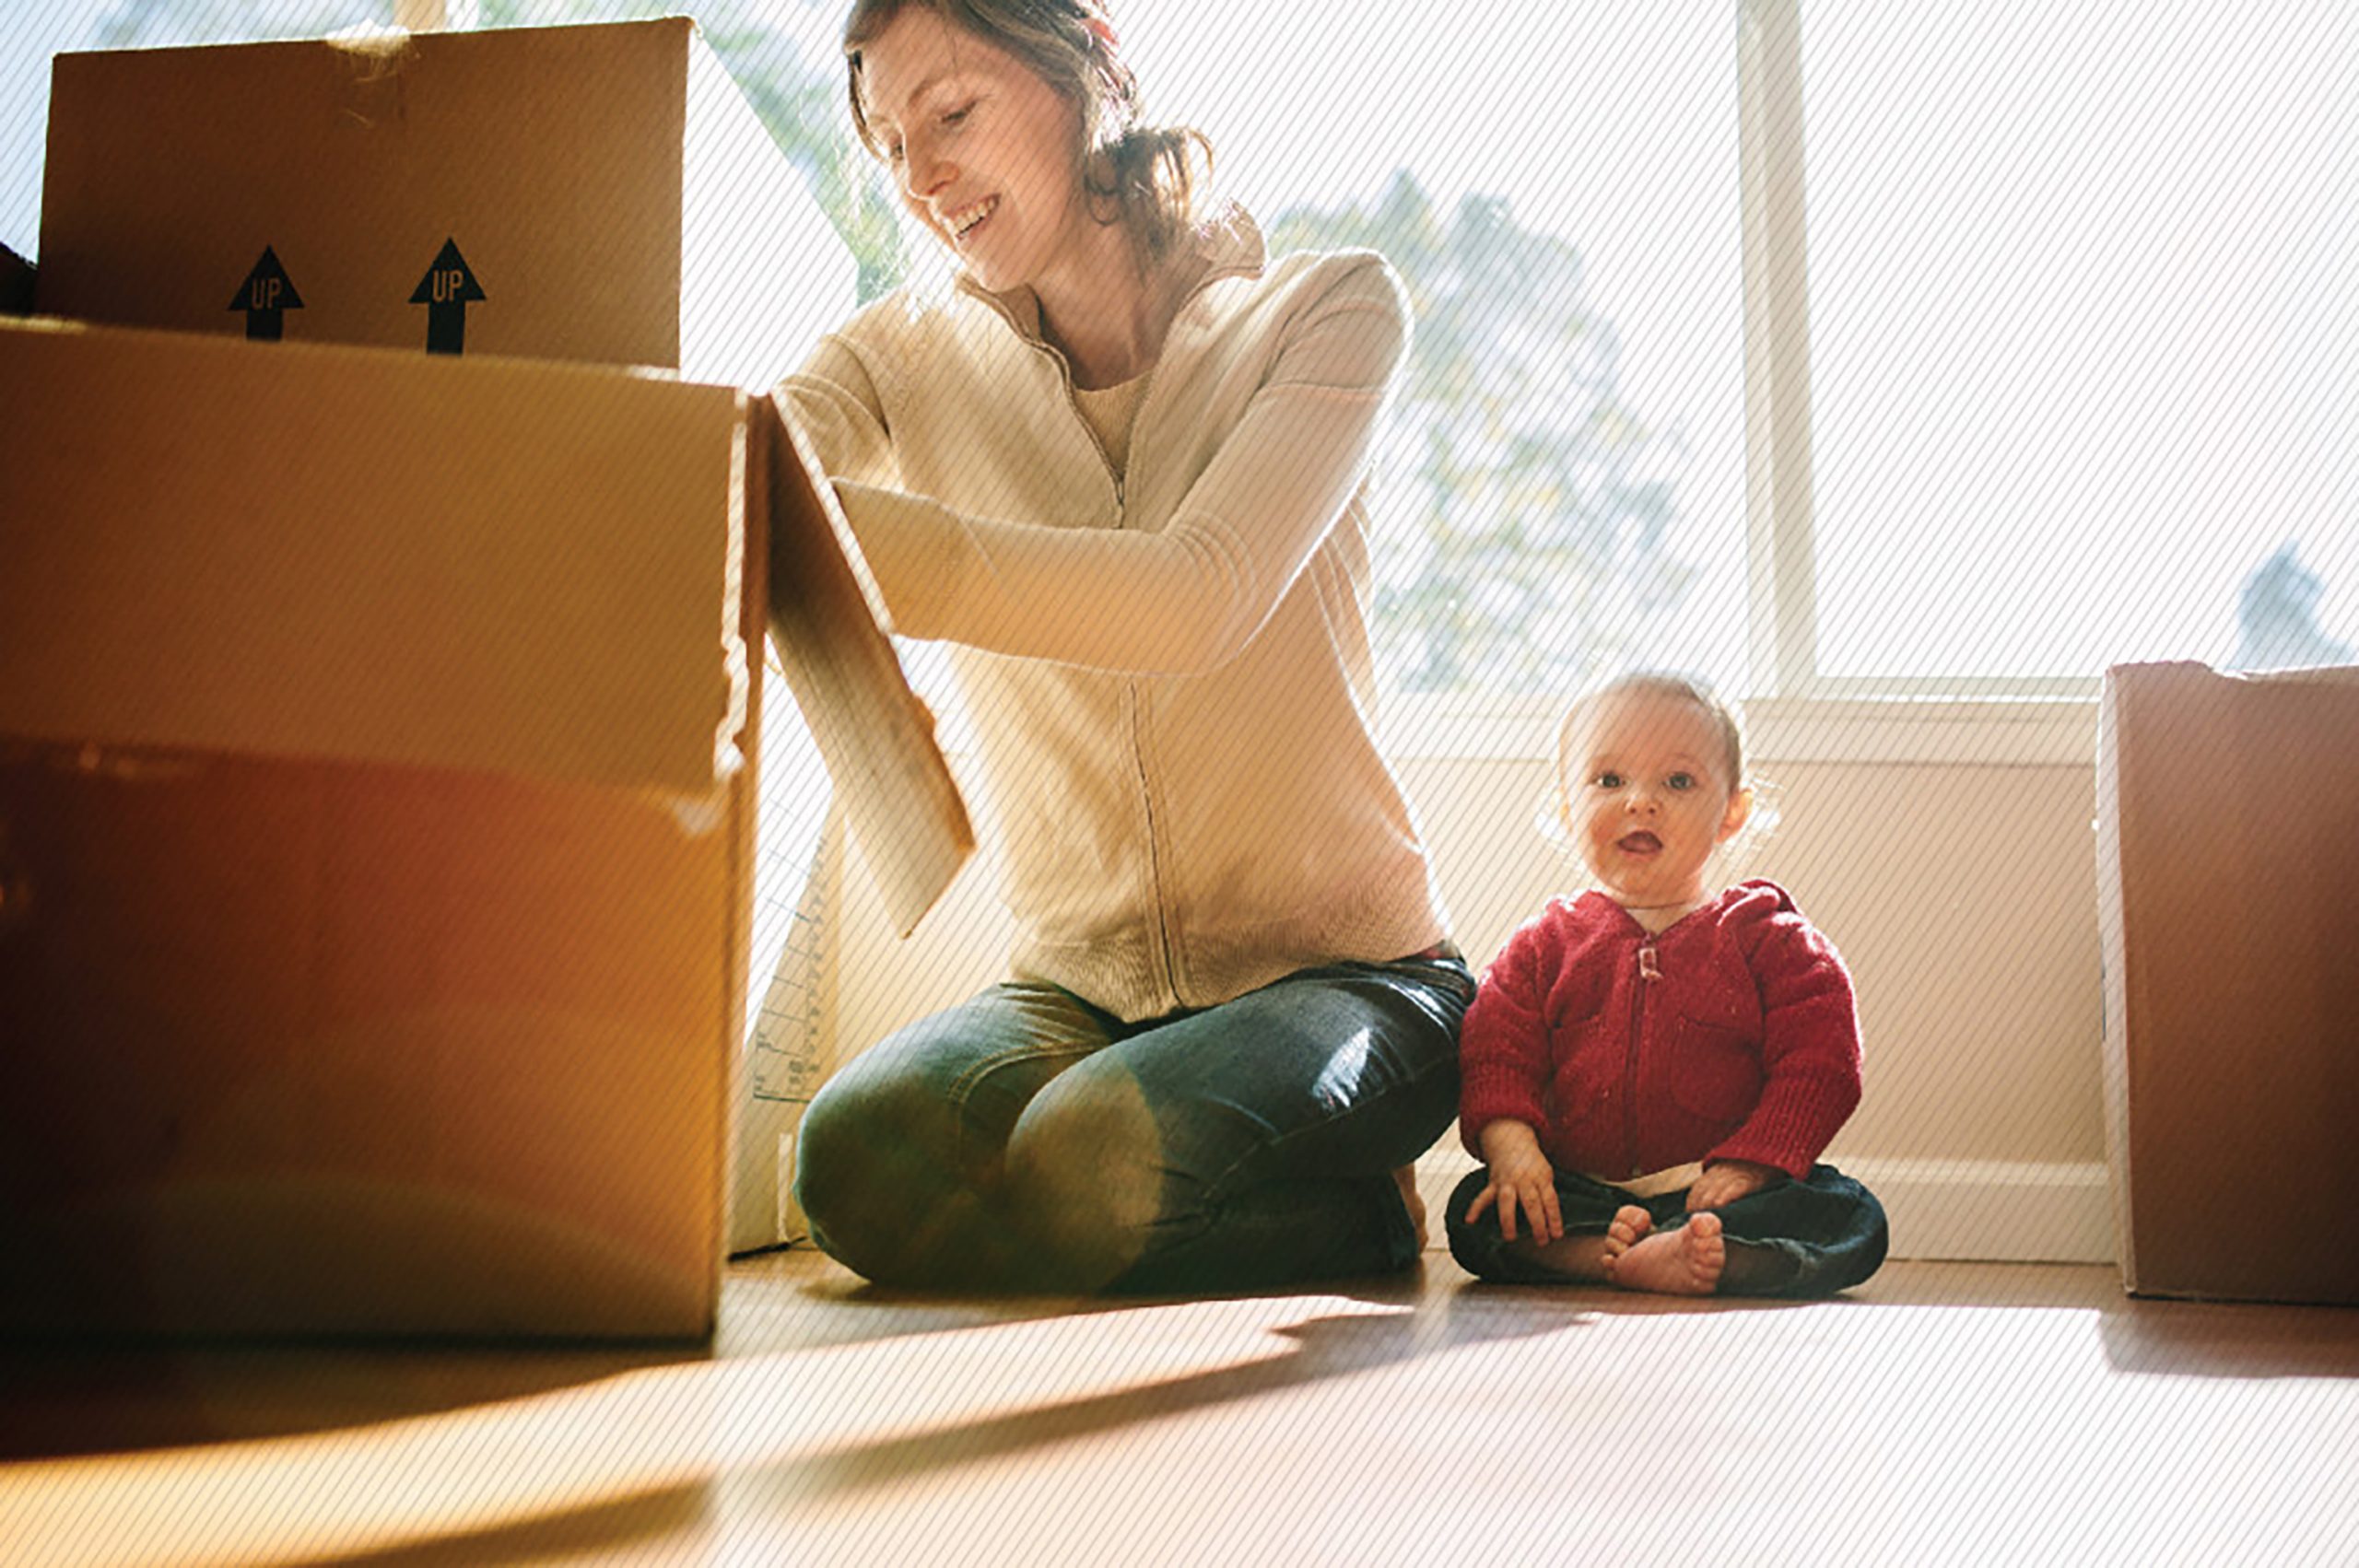 A mom unpacking boxes with her toddler sitting next to her